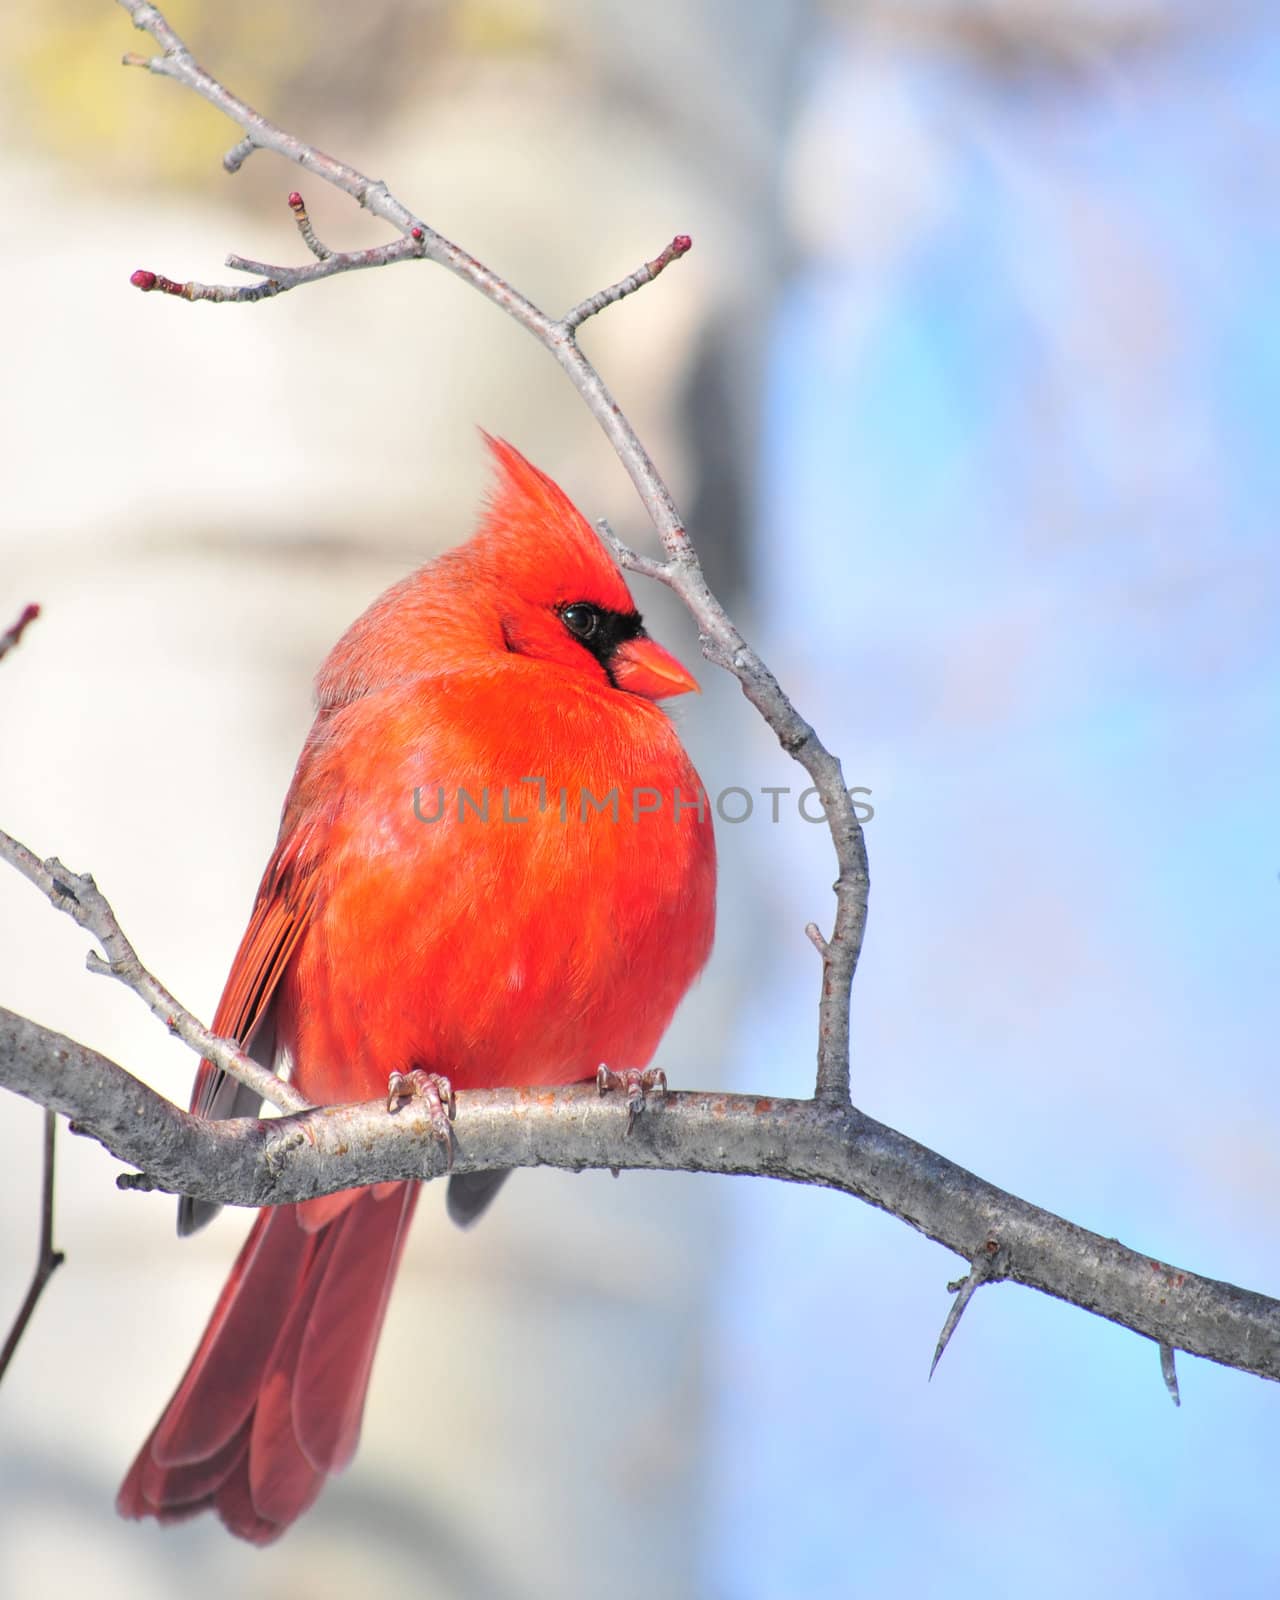 A male Cardinal perched on a branch.